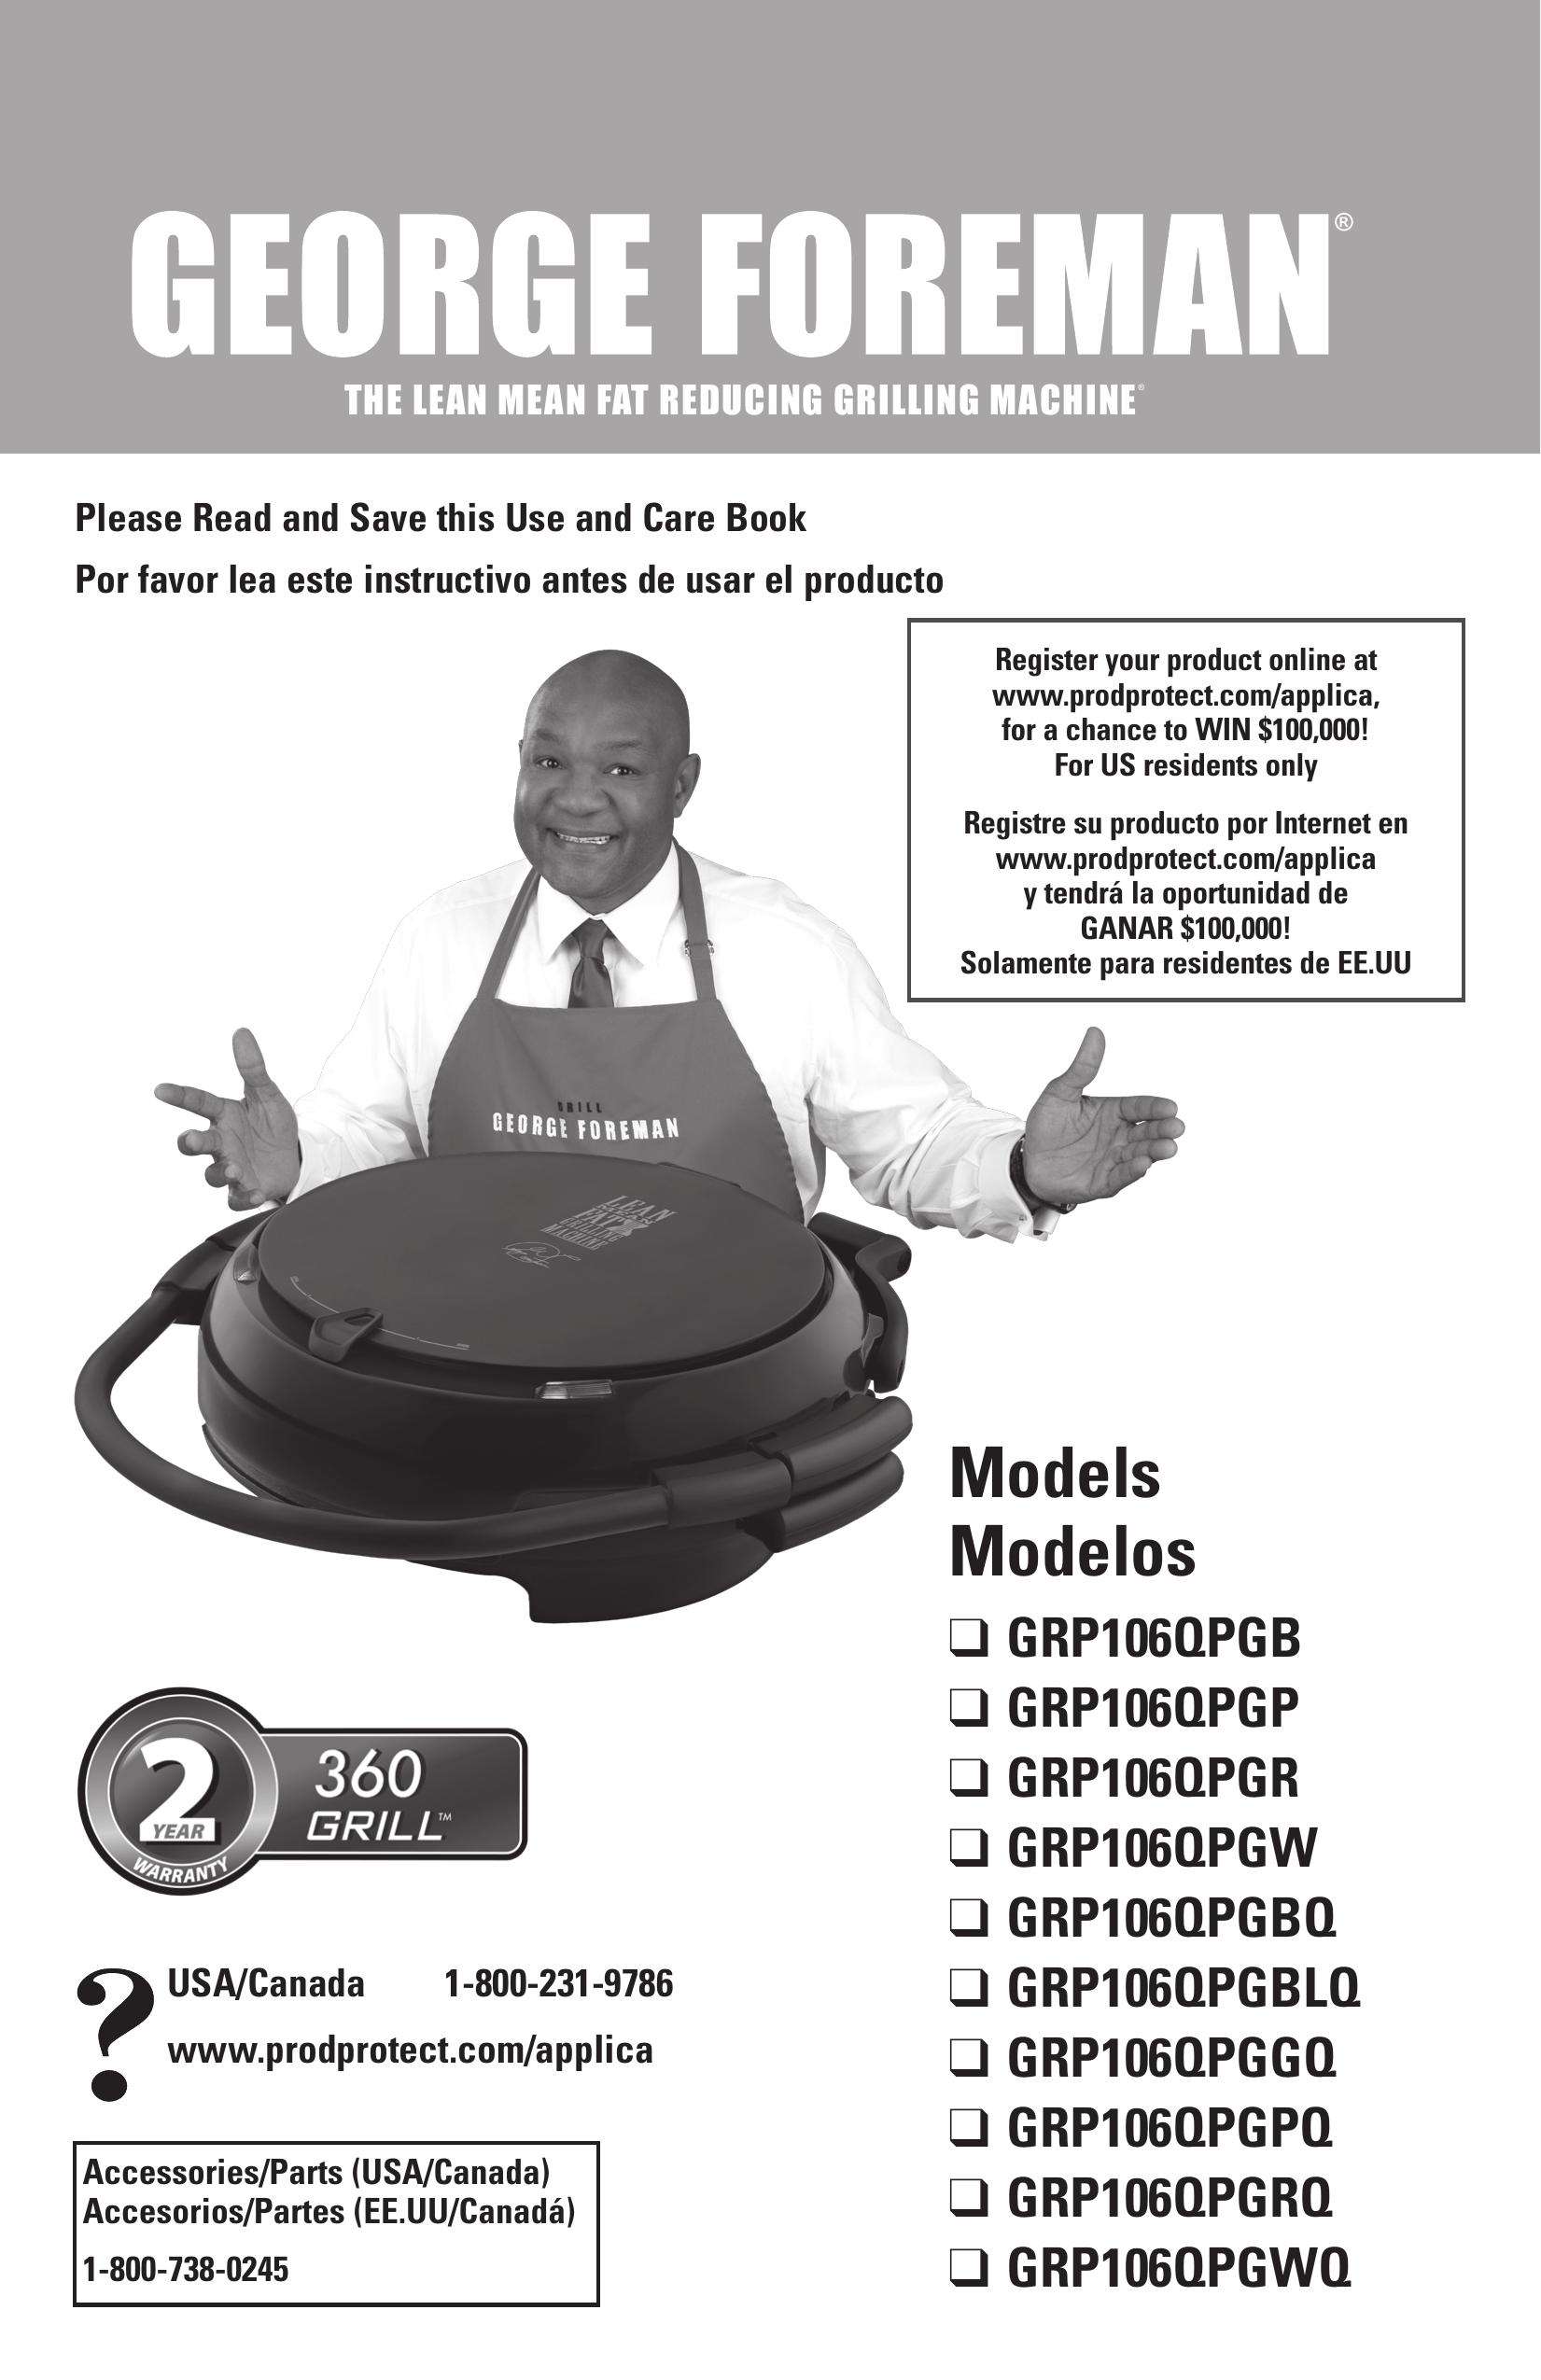 George Foreman GRP106QPGBQ Electric Grill User Manual